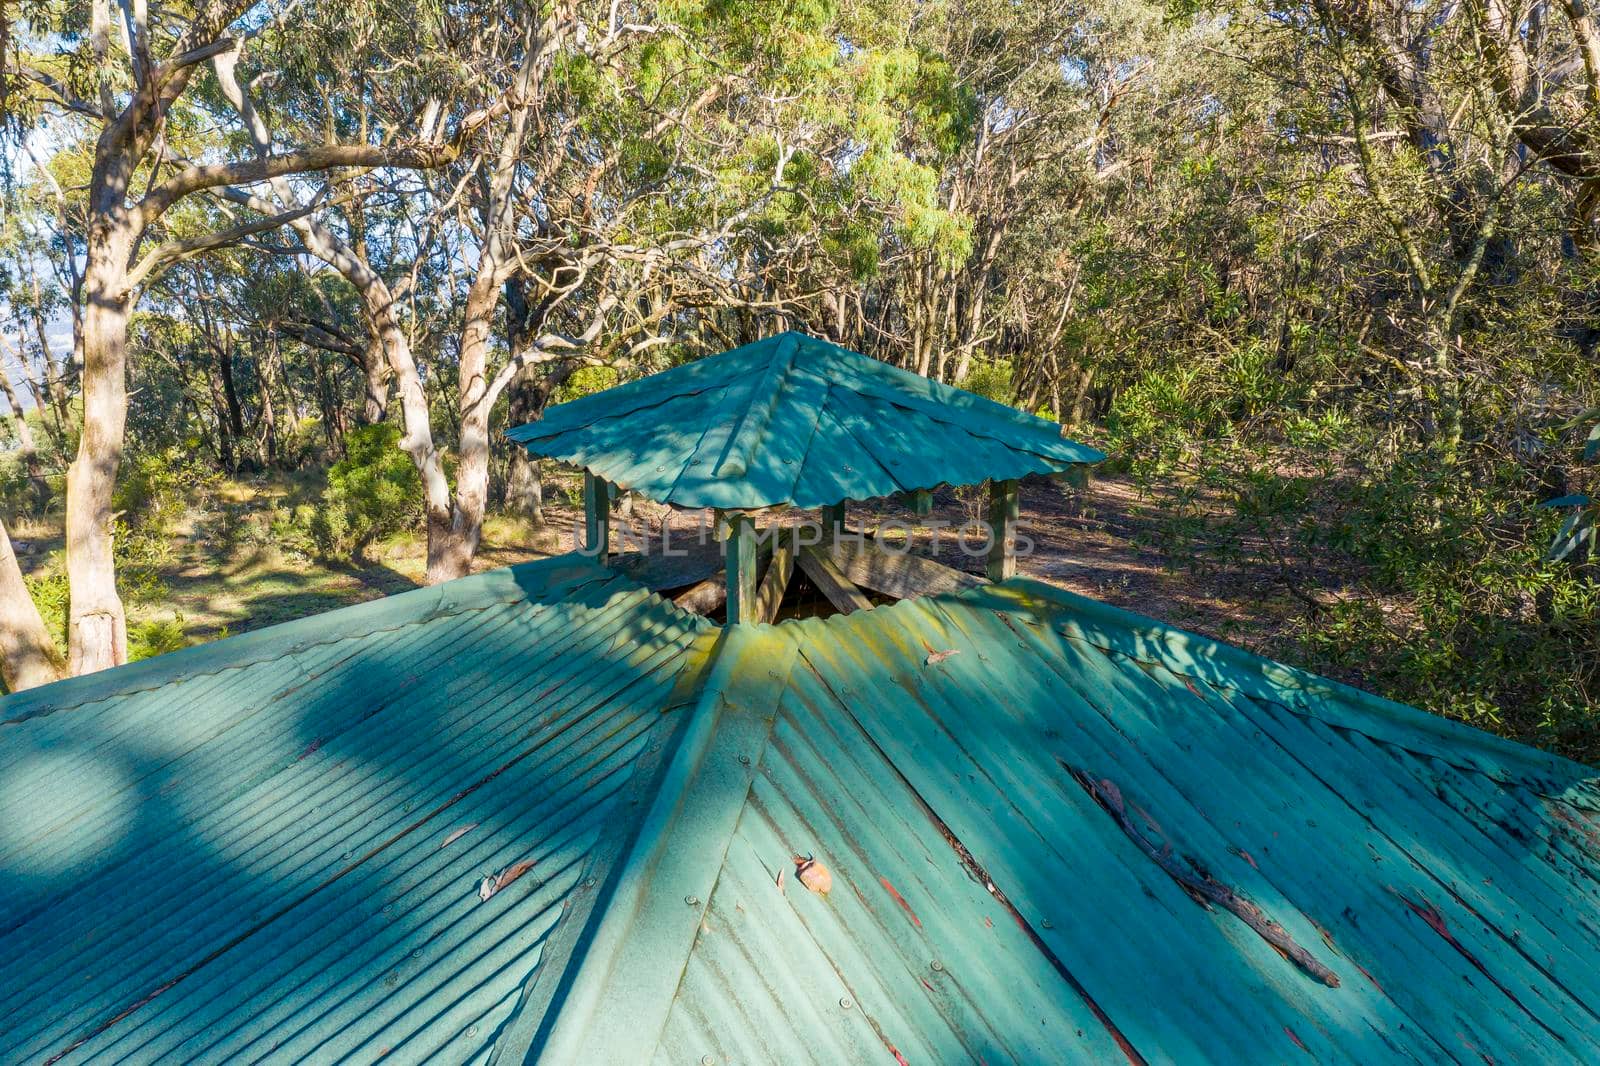 Aerial view of a picnic shed and table in the forest in regional Australia